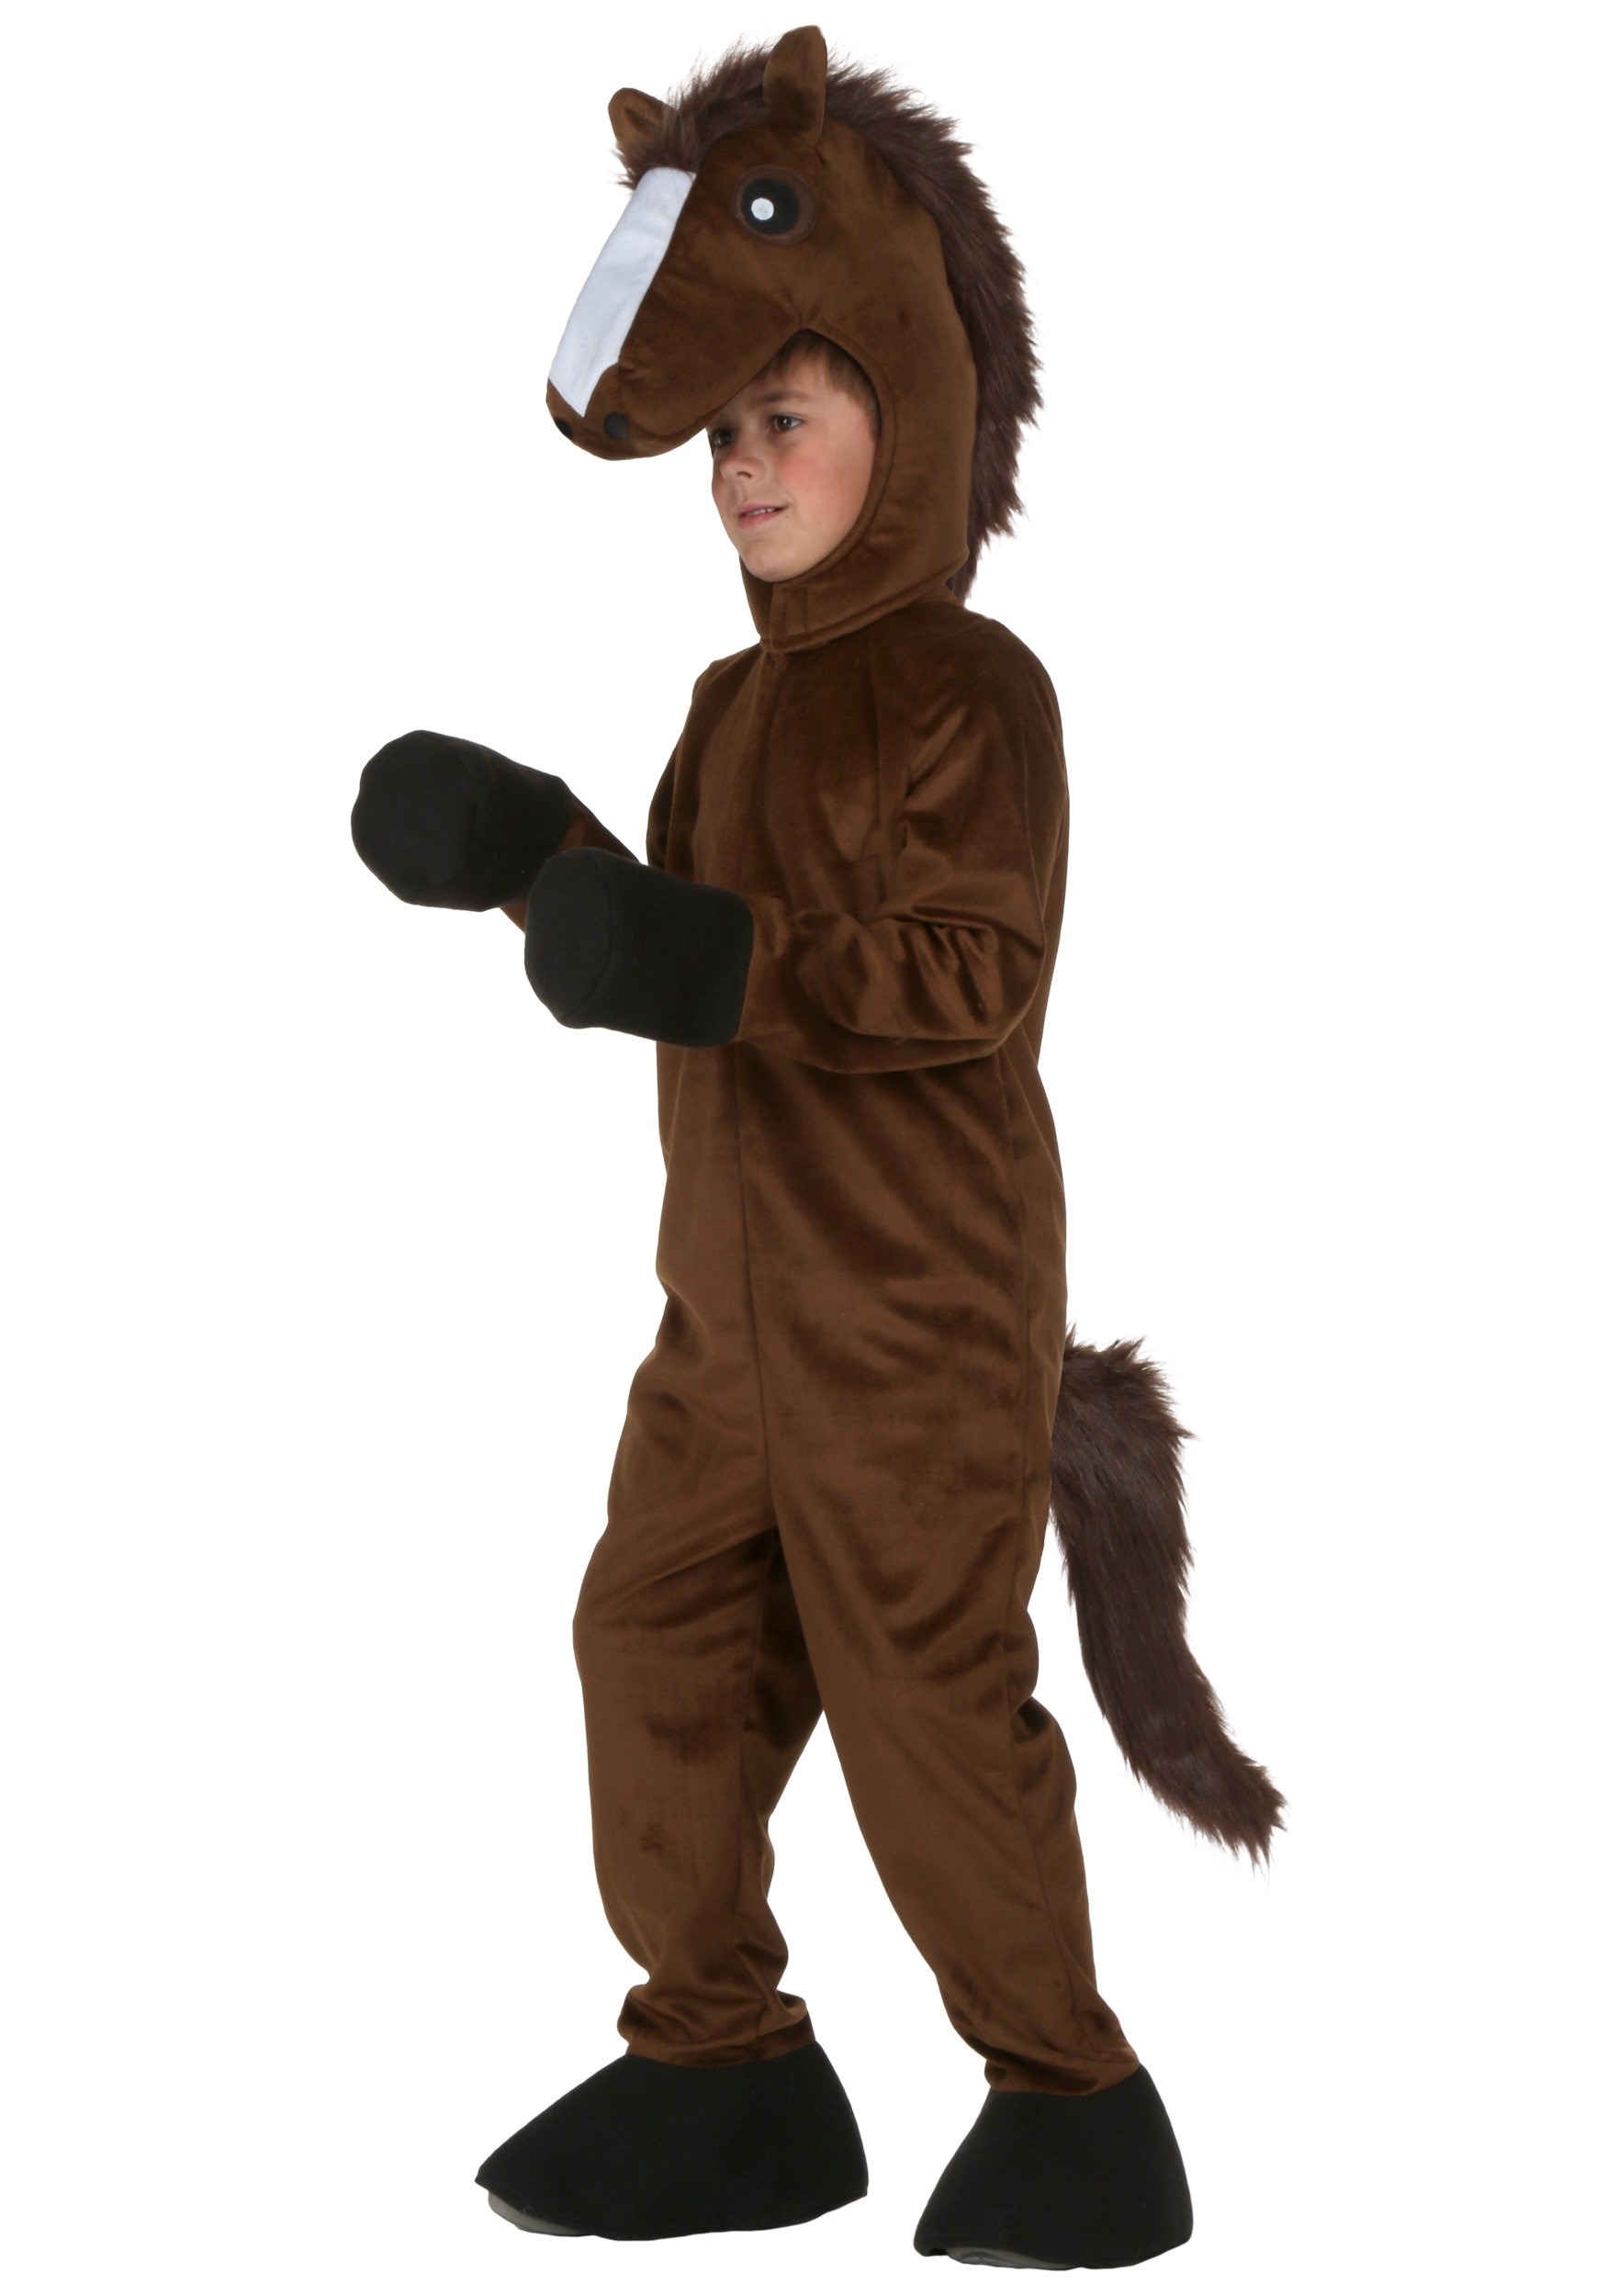 Photos - Fancy Dress FUN Costumes Horse Costume for Kids With Full Suit Brown FUN2925CH